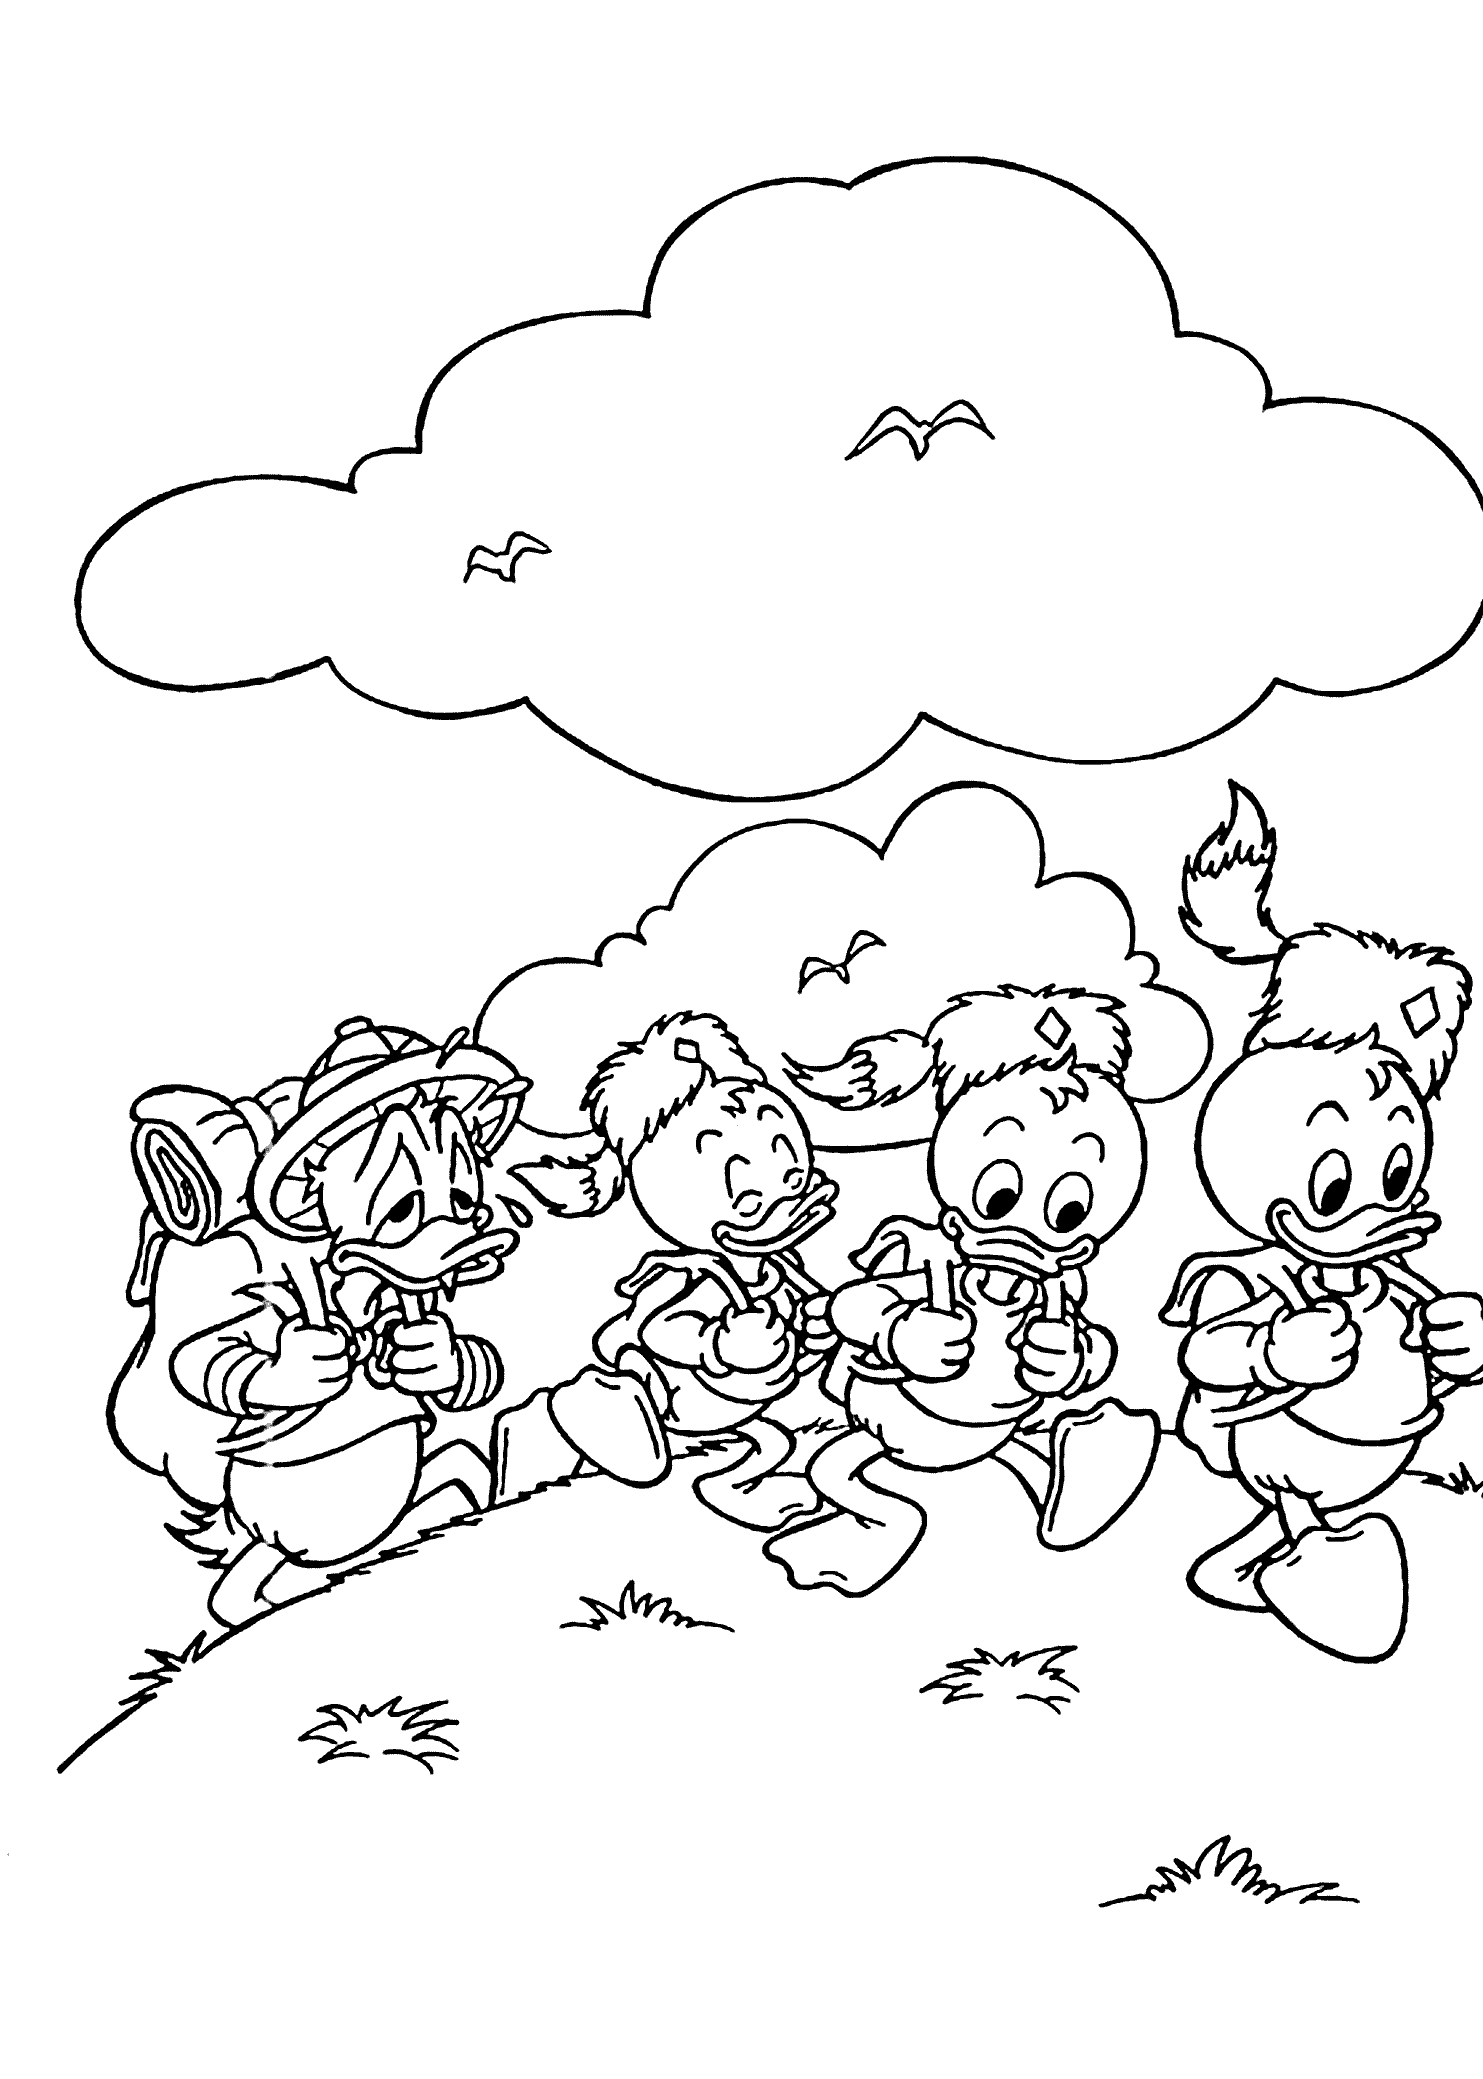 Scrooge Mcduck Coloring Pages For Kids Printable Free Camping Coloring Pages Disney Coloring Pages Cartoon Coloring Pages